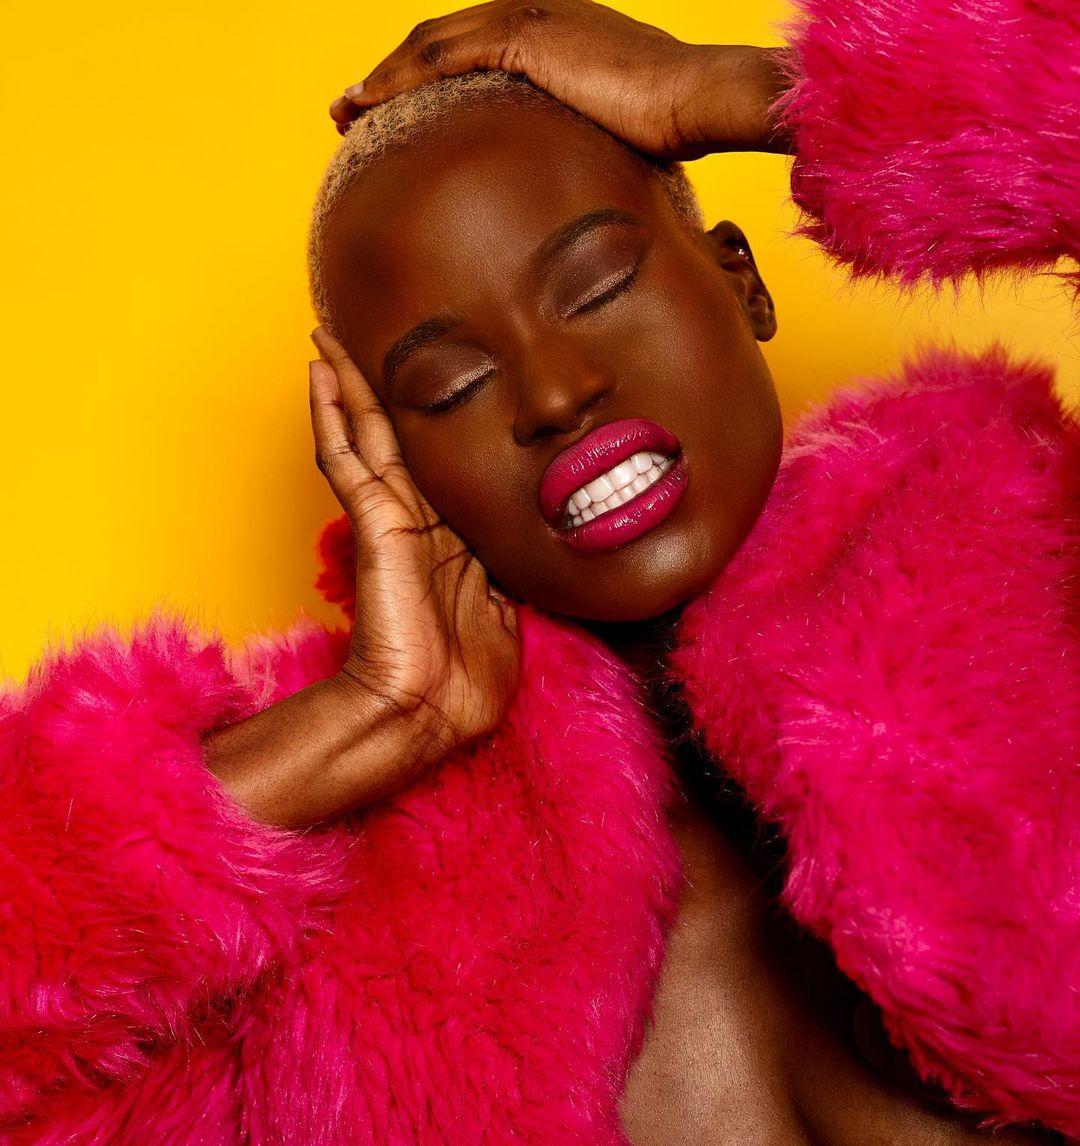 class="content__text"
 Homage to @gracejonesofficial with our gorgeous @wokiezariaa Photographs by @ashguptaslife 
Photo Assist/ DIT @tuhanbedi 
Photo Assist/ Producer @jwicecarver 
Styled by @ jessejcollections @thetrendhaus 
MUA @mattiemariemakeup 
BTS video @chiefjusticehamilton 
Digital Post Production @sahilrohira